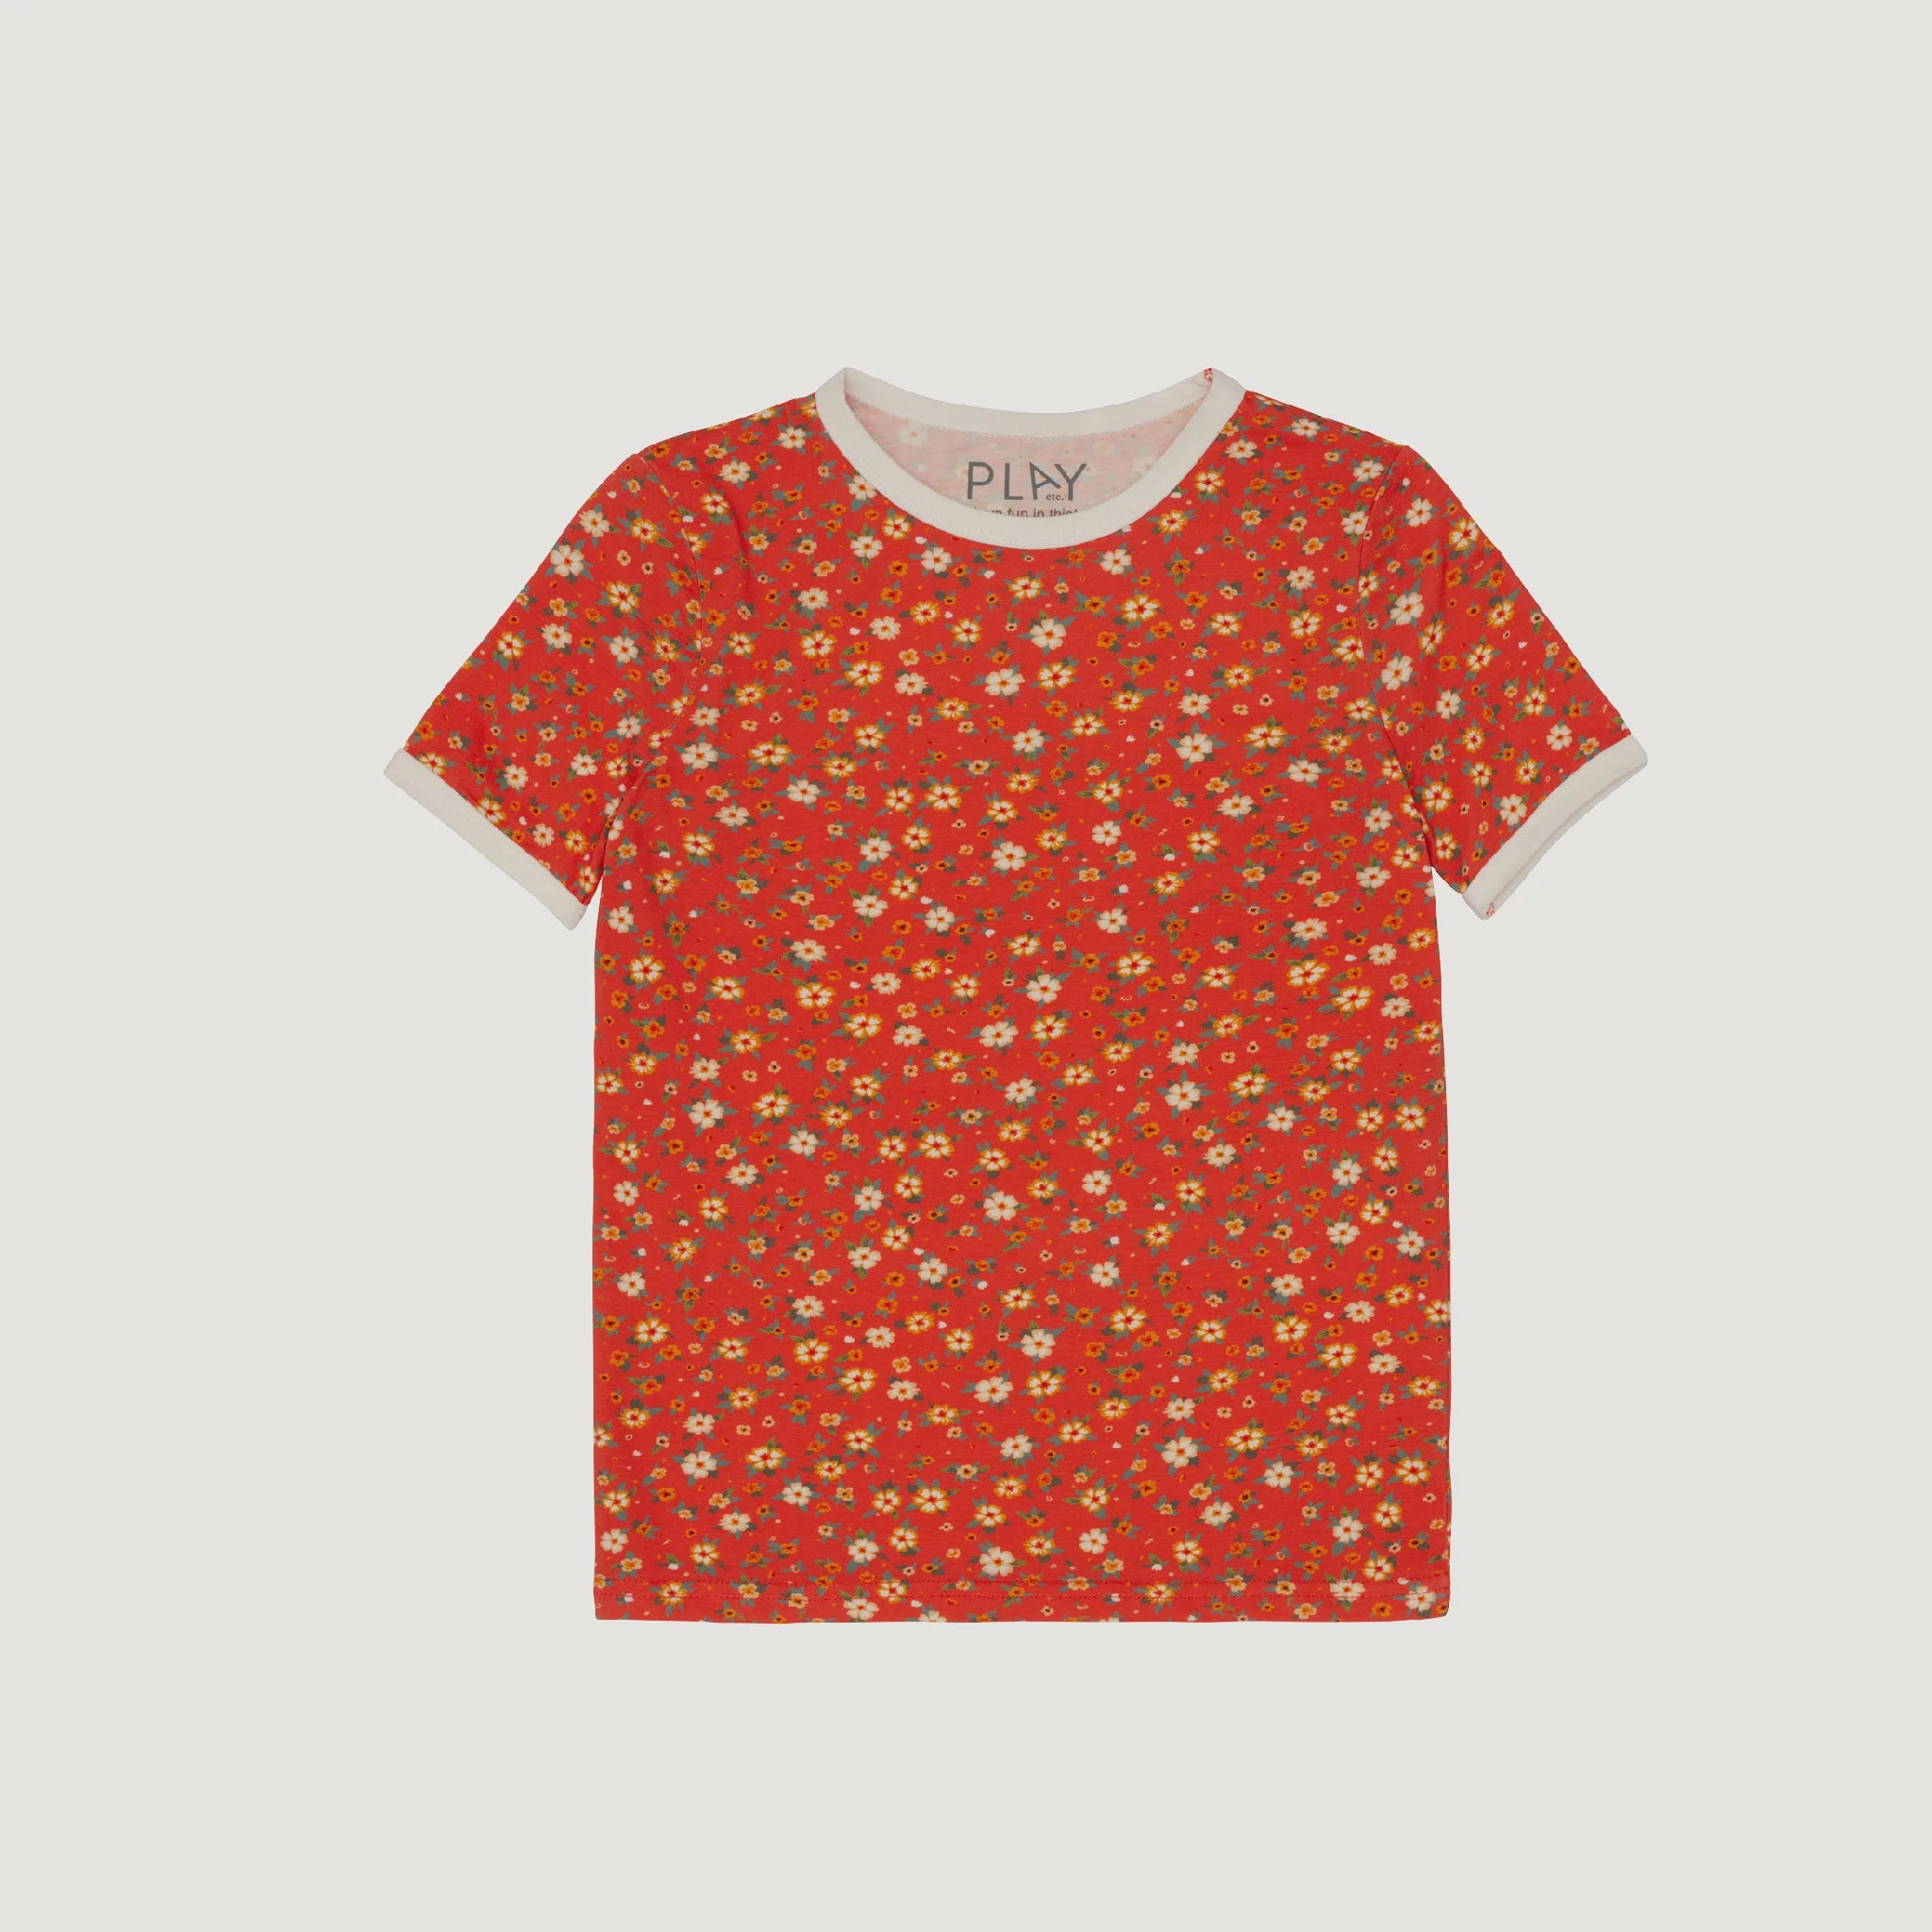 Play Etc - Floral Ringer Tee - Sunkist Floral